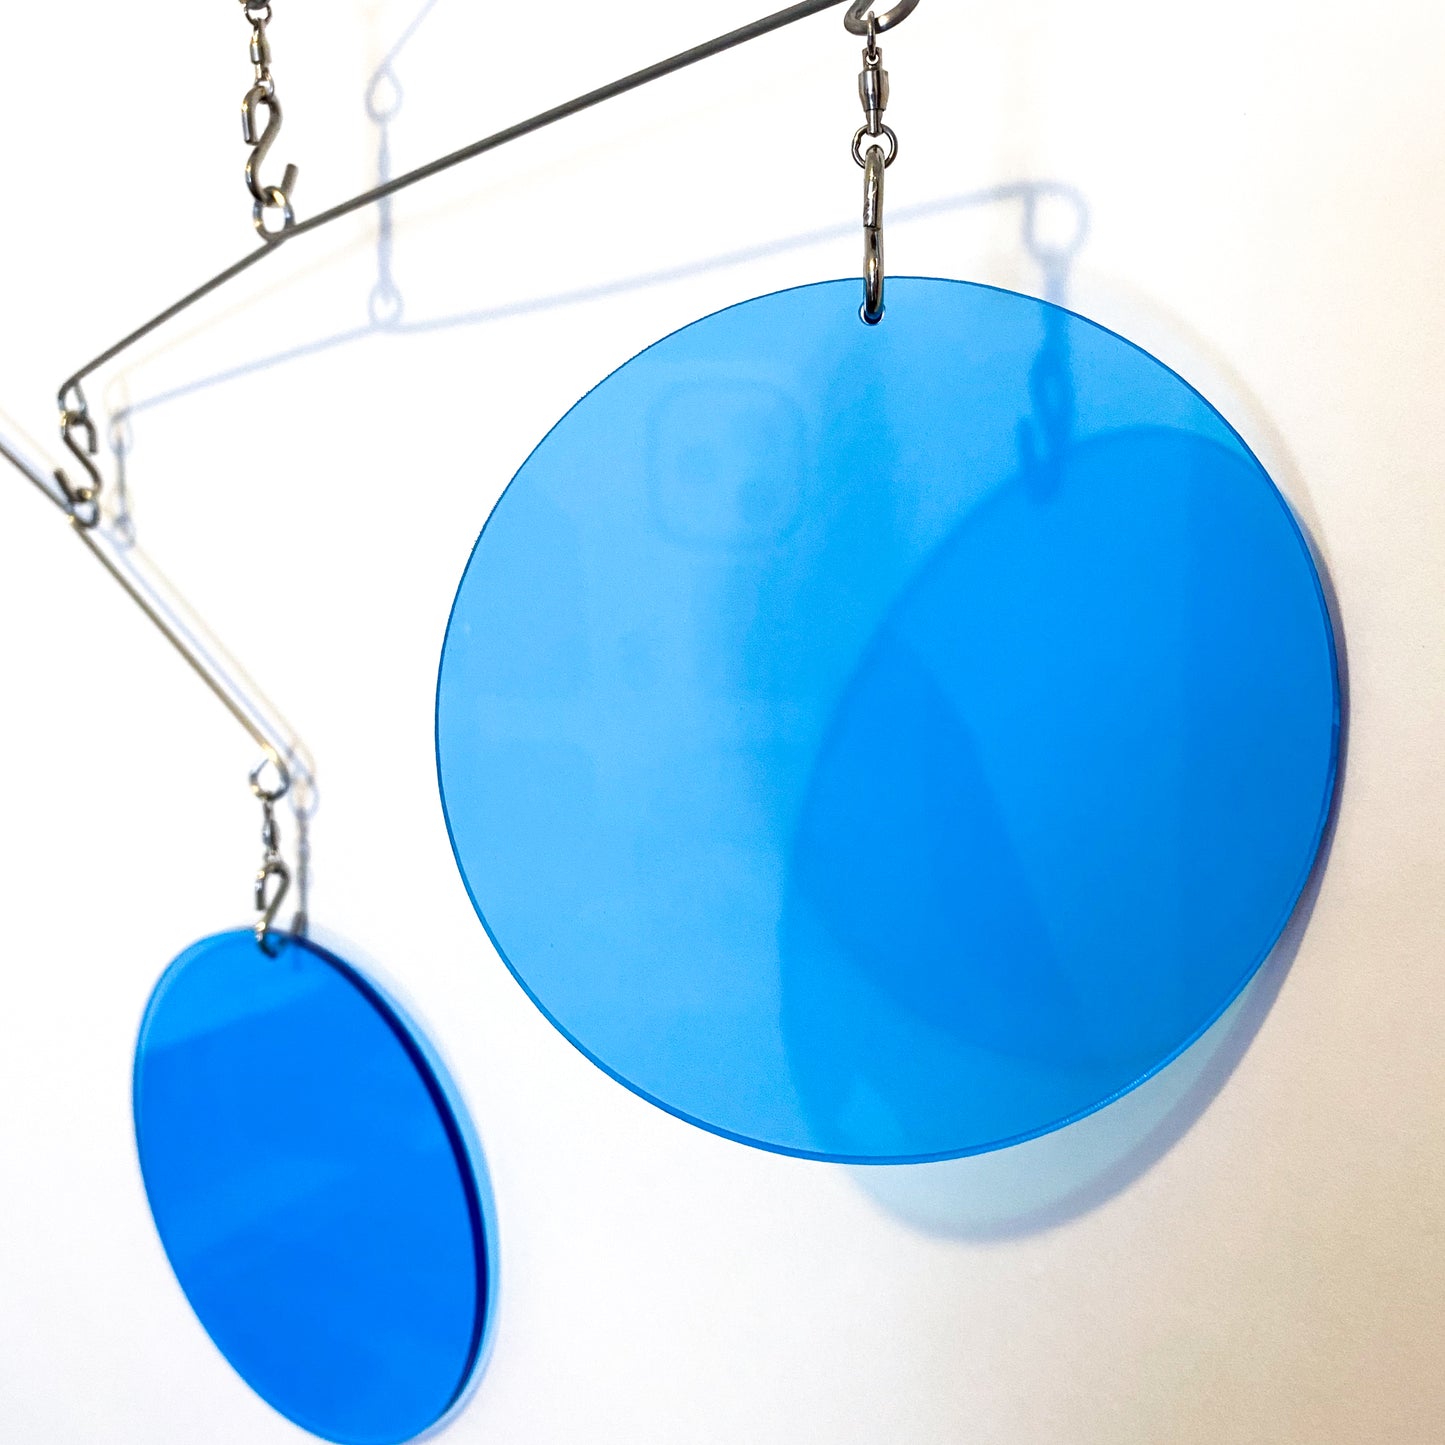 Closeup of Clear Blue Acrylic Atomic Mobile - kinetic hanging art mobiles for modern home decor by AtomicMobiles.com